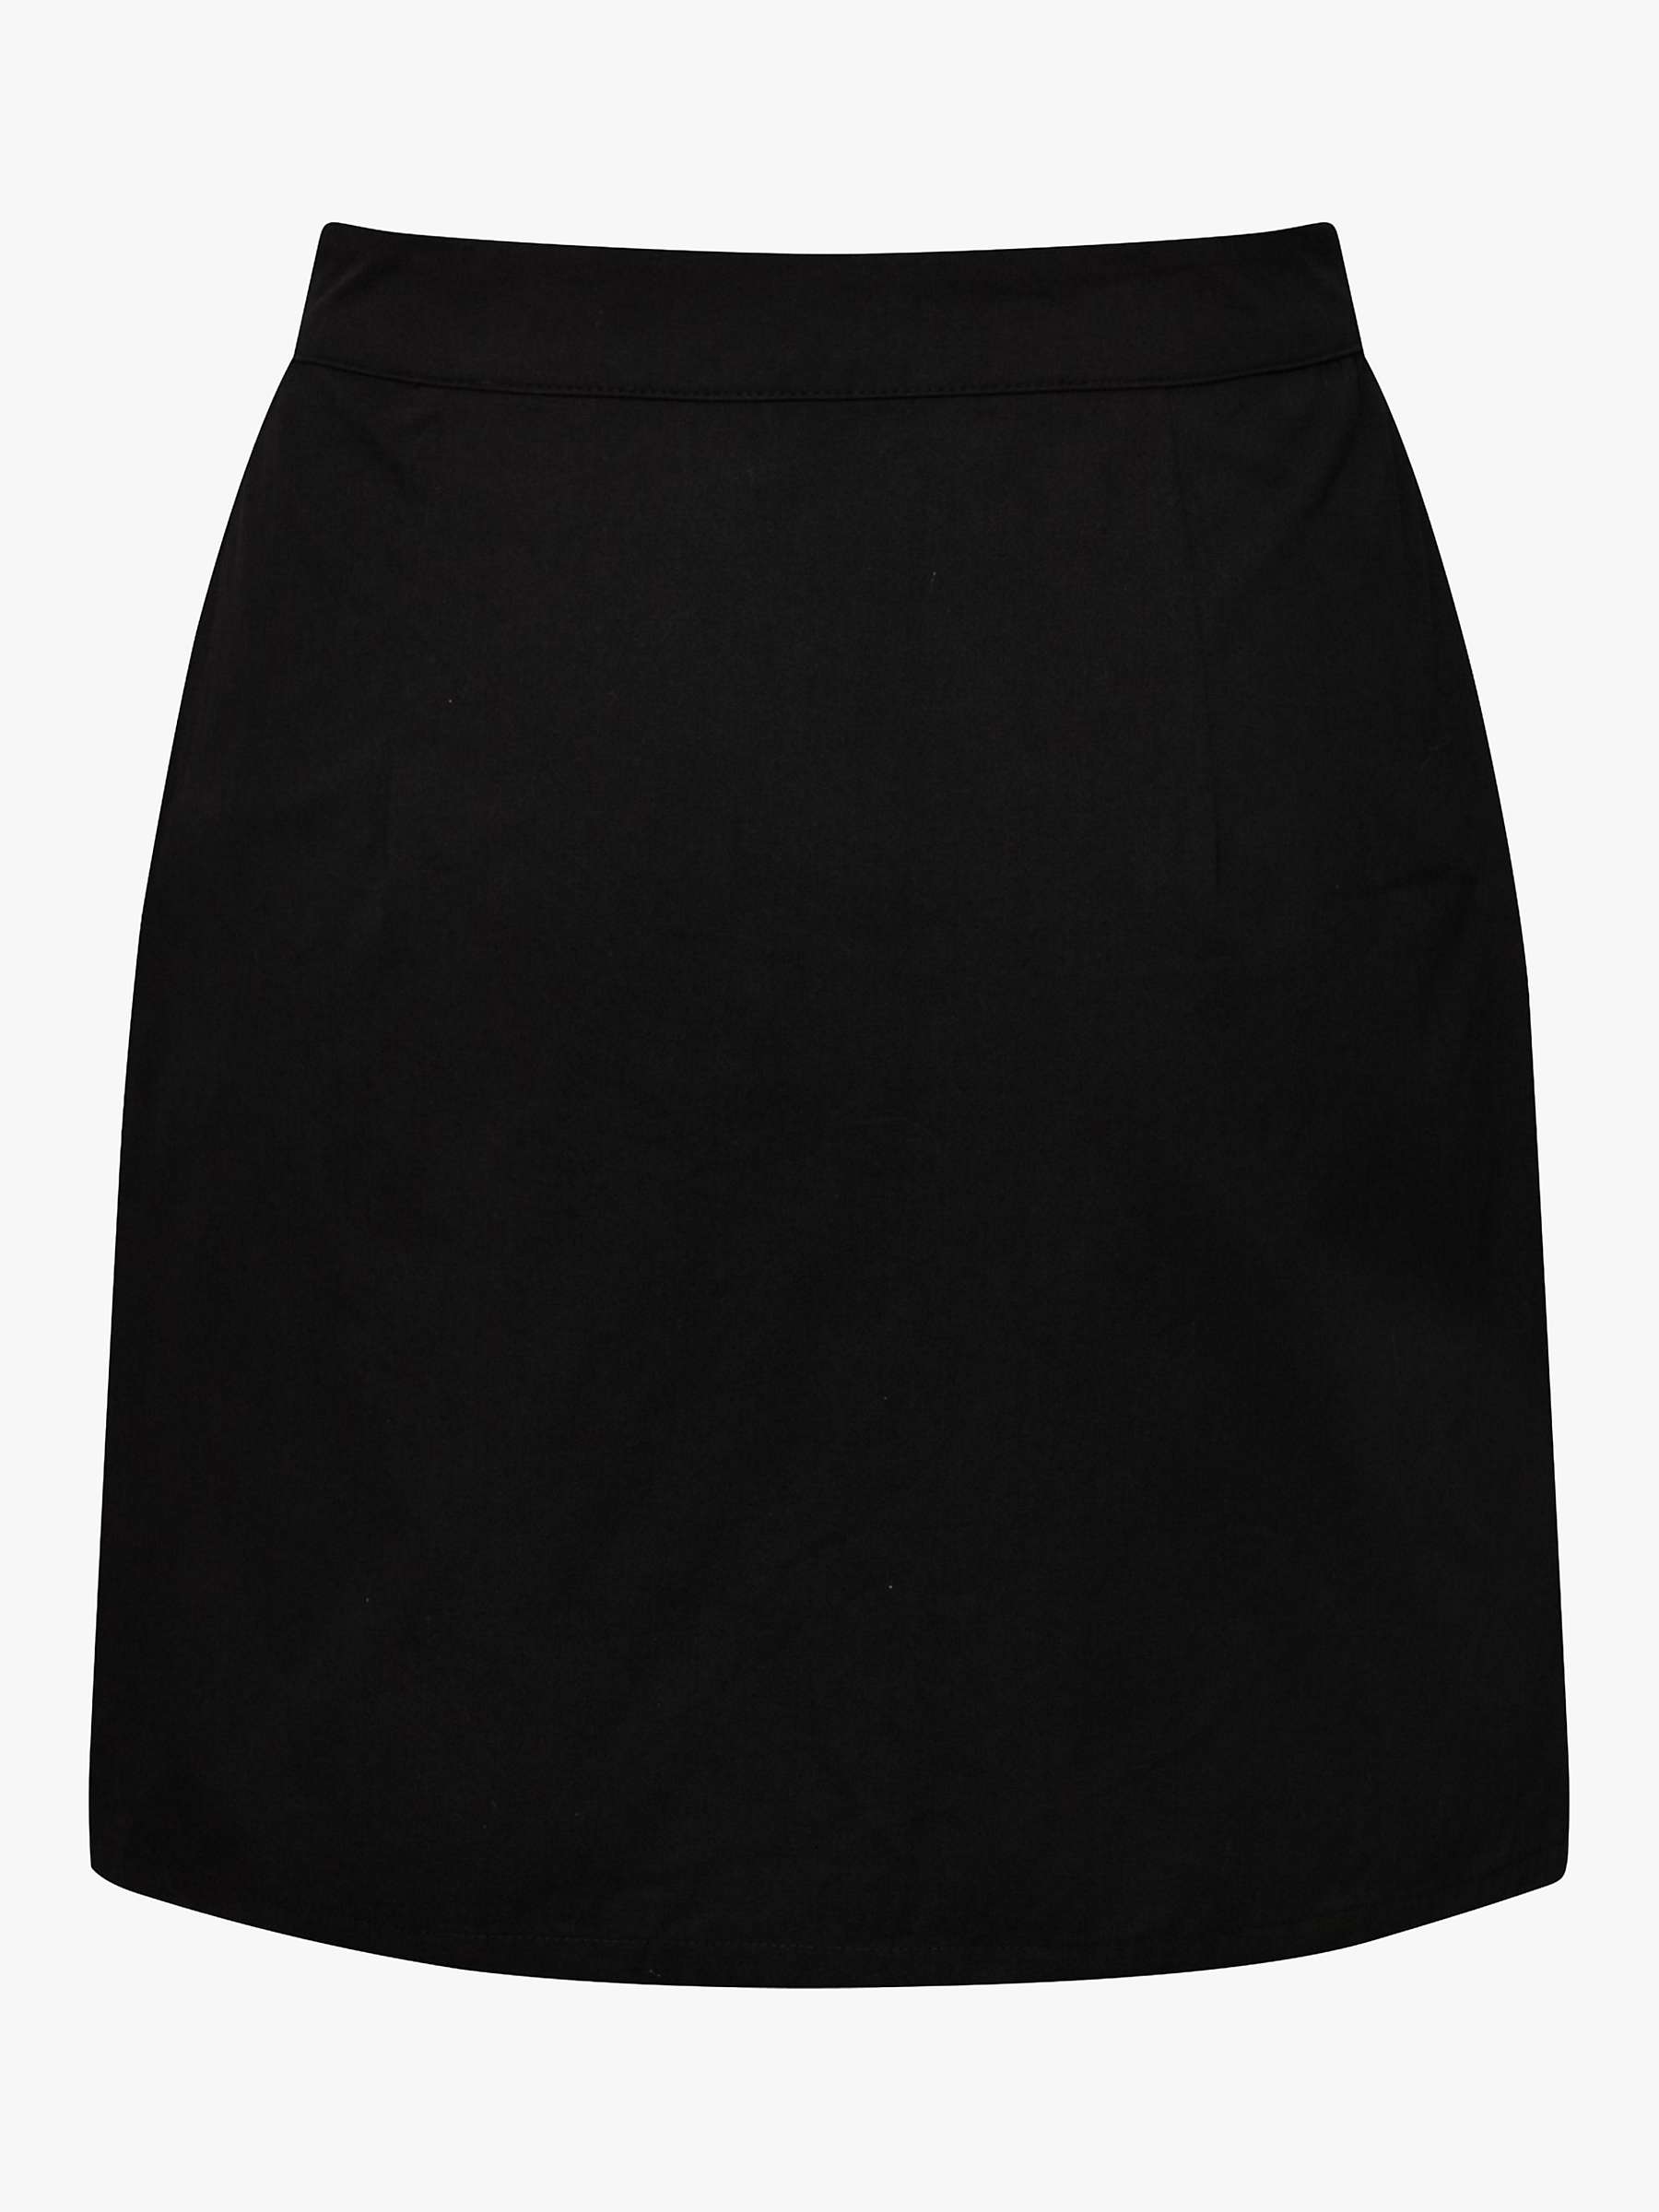 Buy A-VIEW Calle New Mini Skirt, Black Online at johnlewis.com